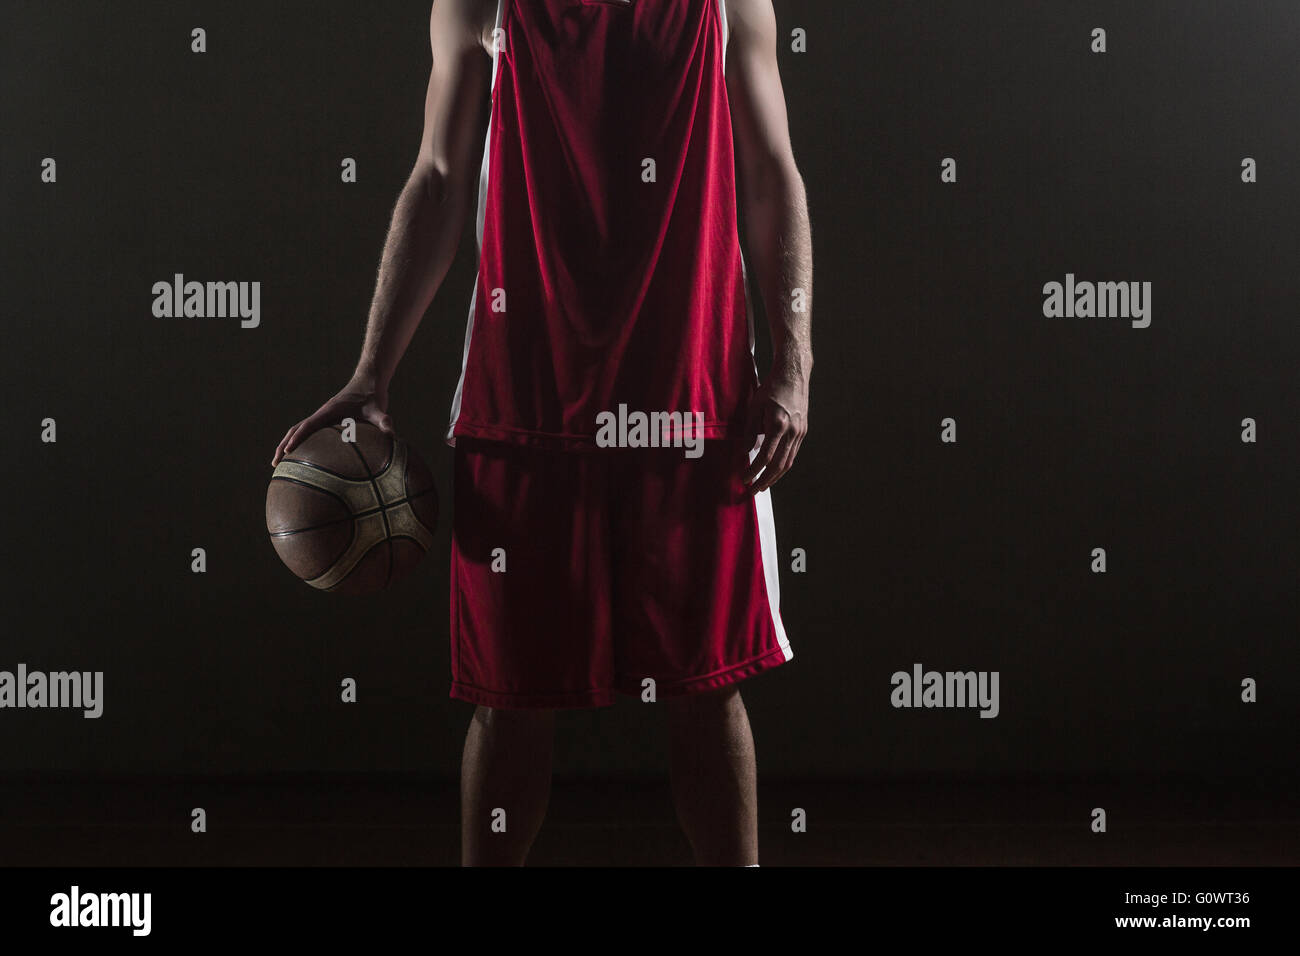 Portrait of basketball player holding a ball Stock Photo